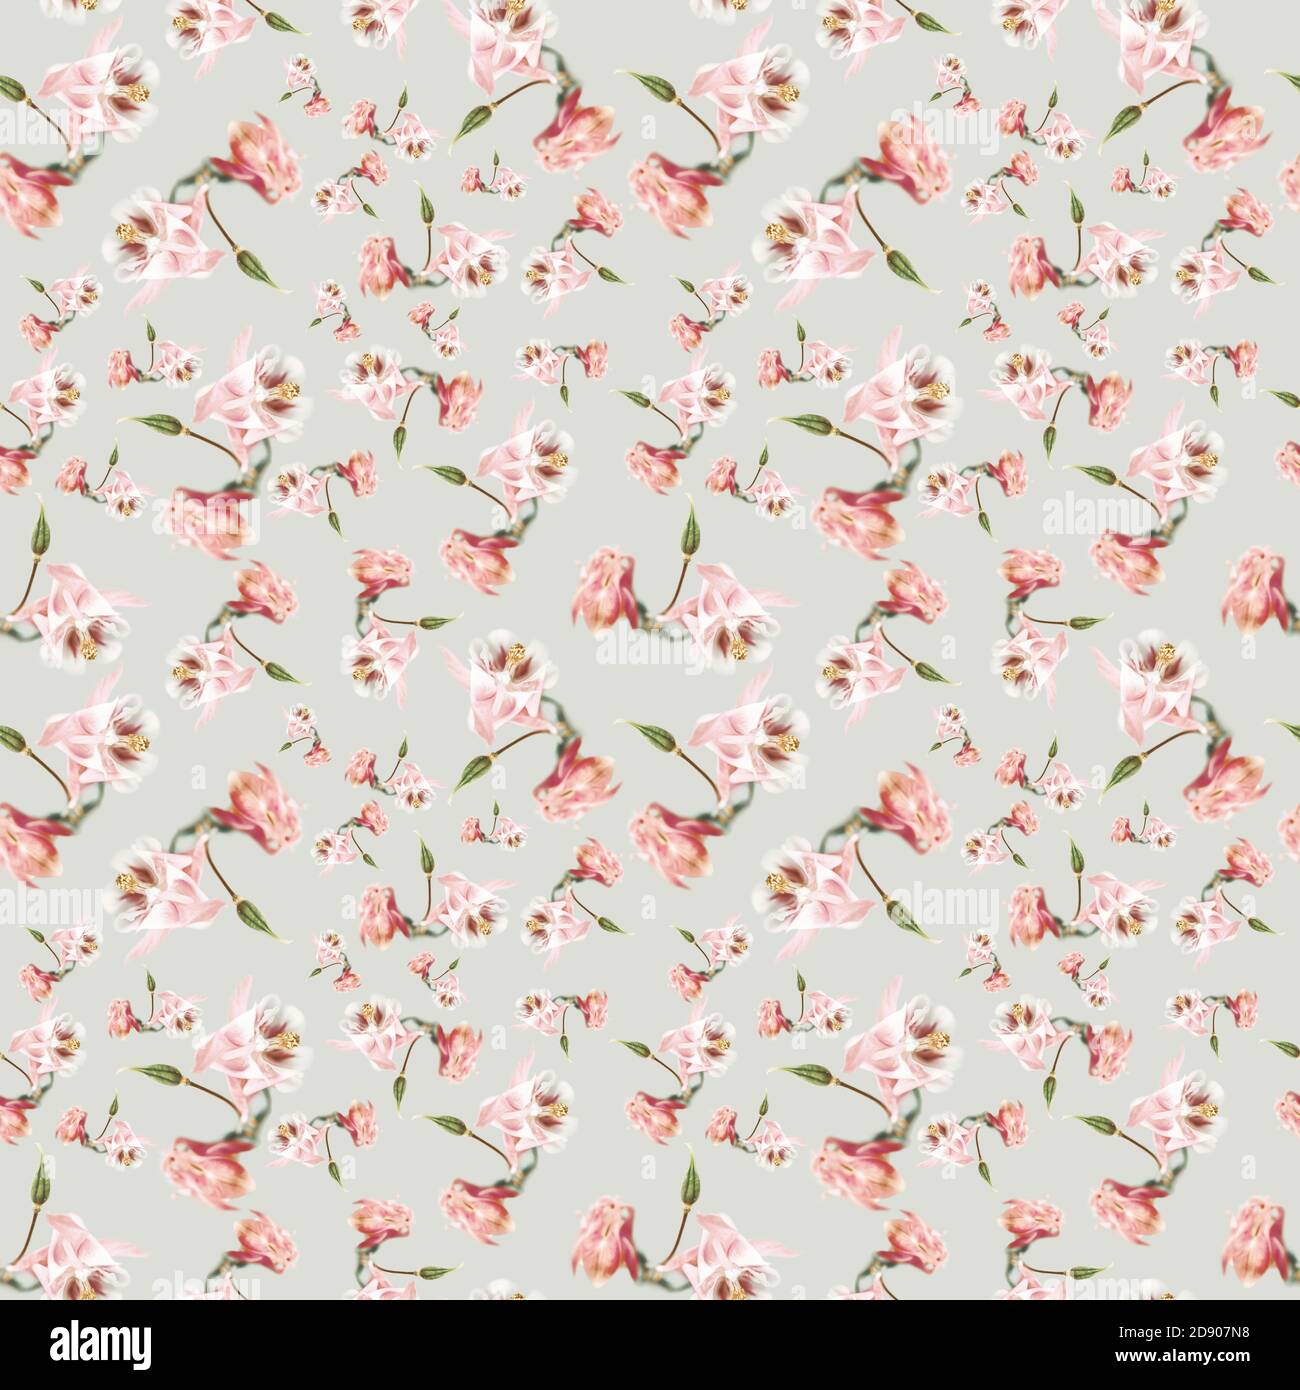 Beautiful seamless pattern. Seamless floral background of soft focus pink aquilegia flowers Stock Photo